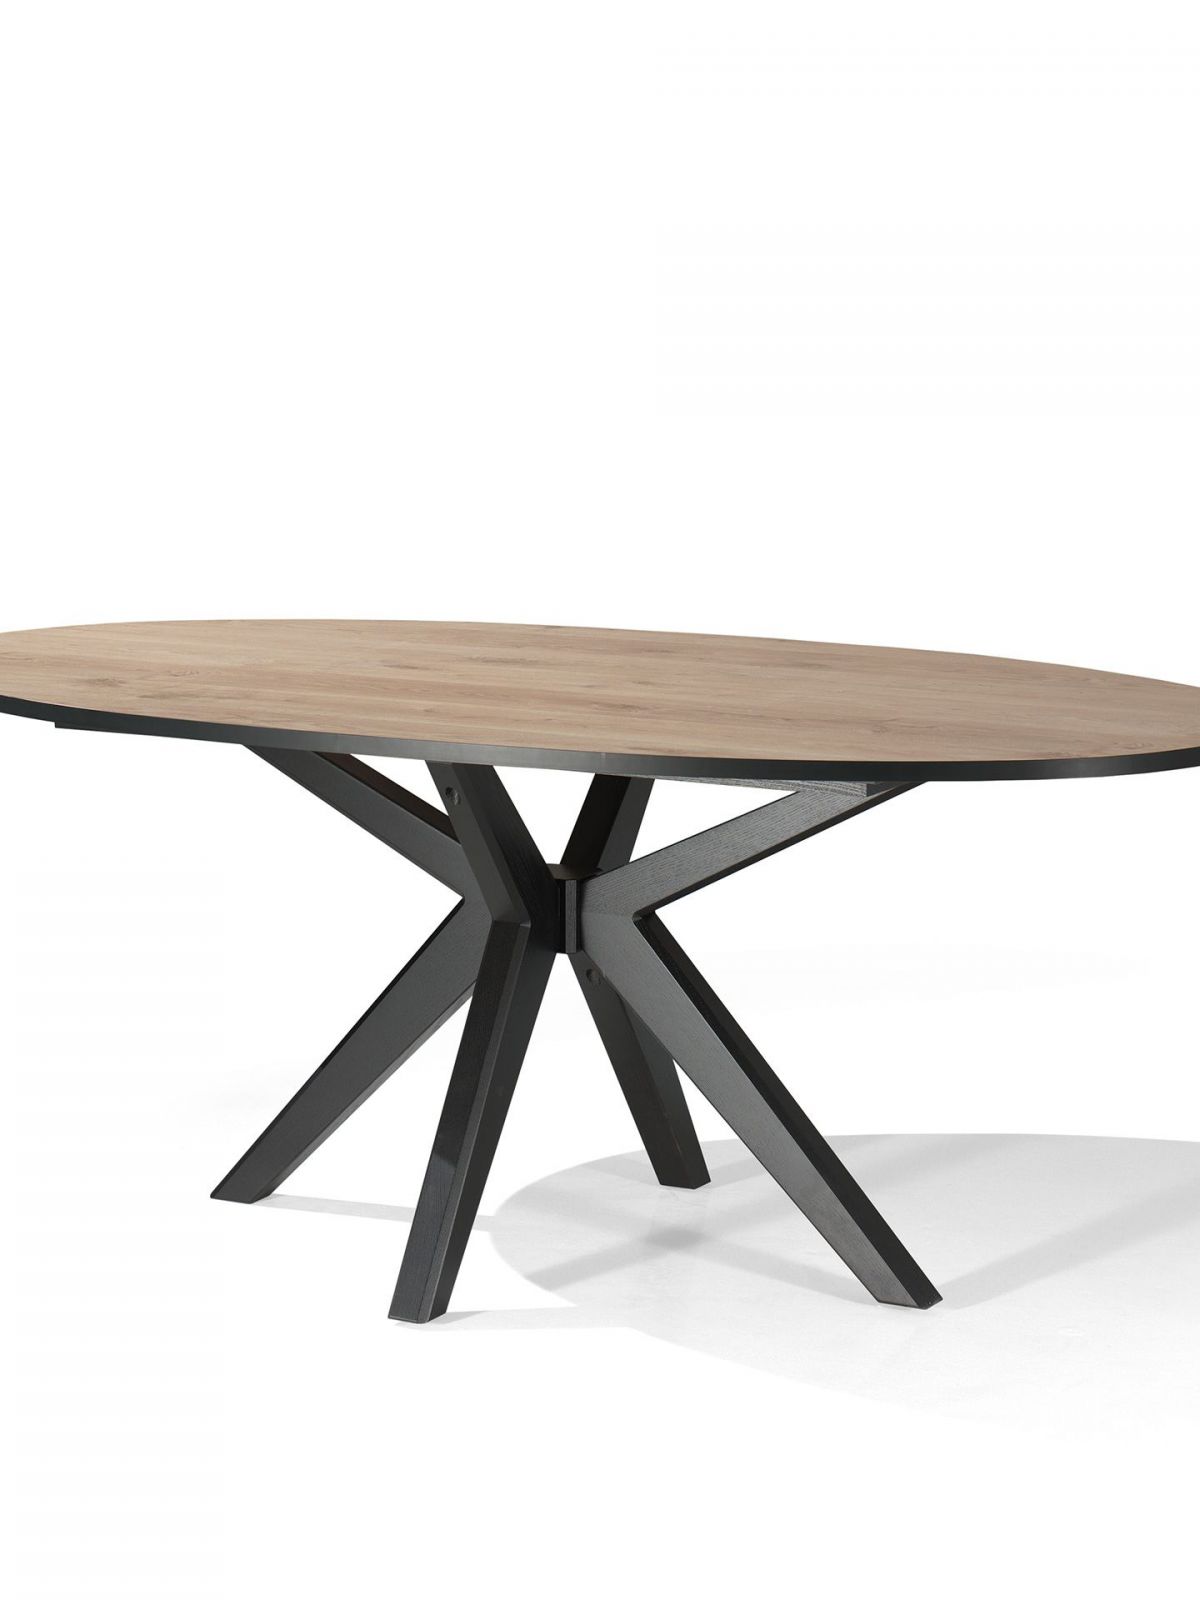 Table ovale fixe pied central